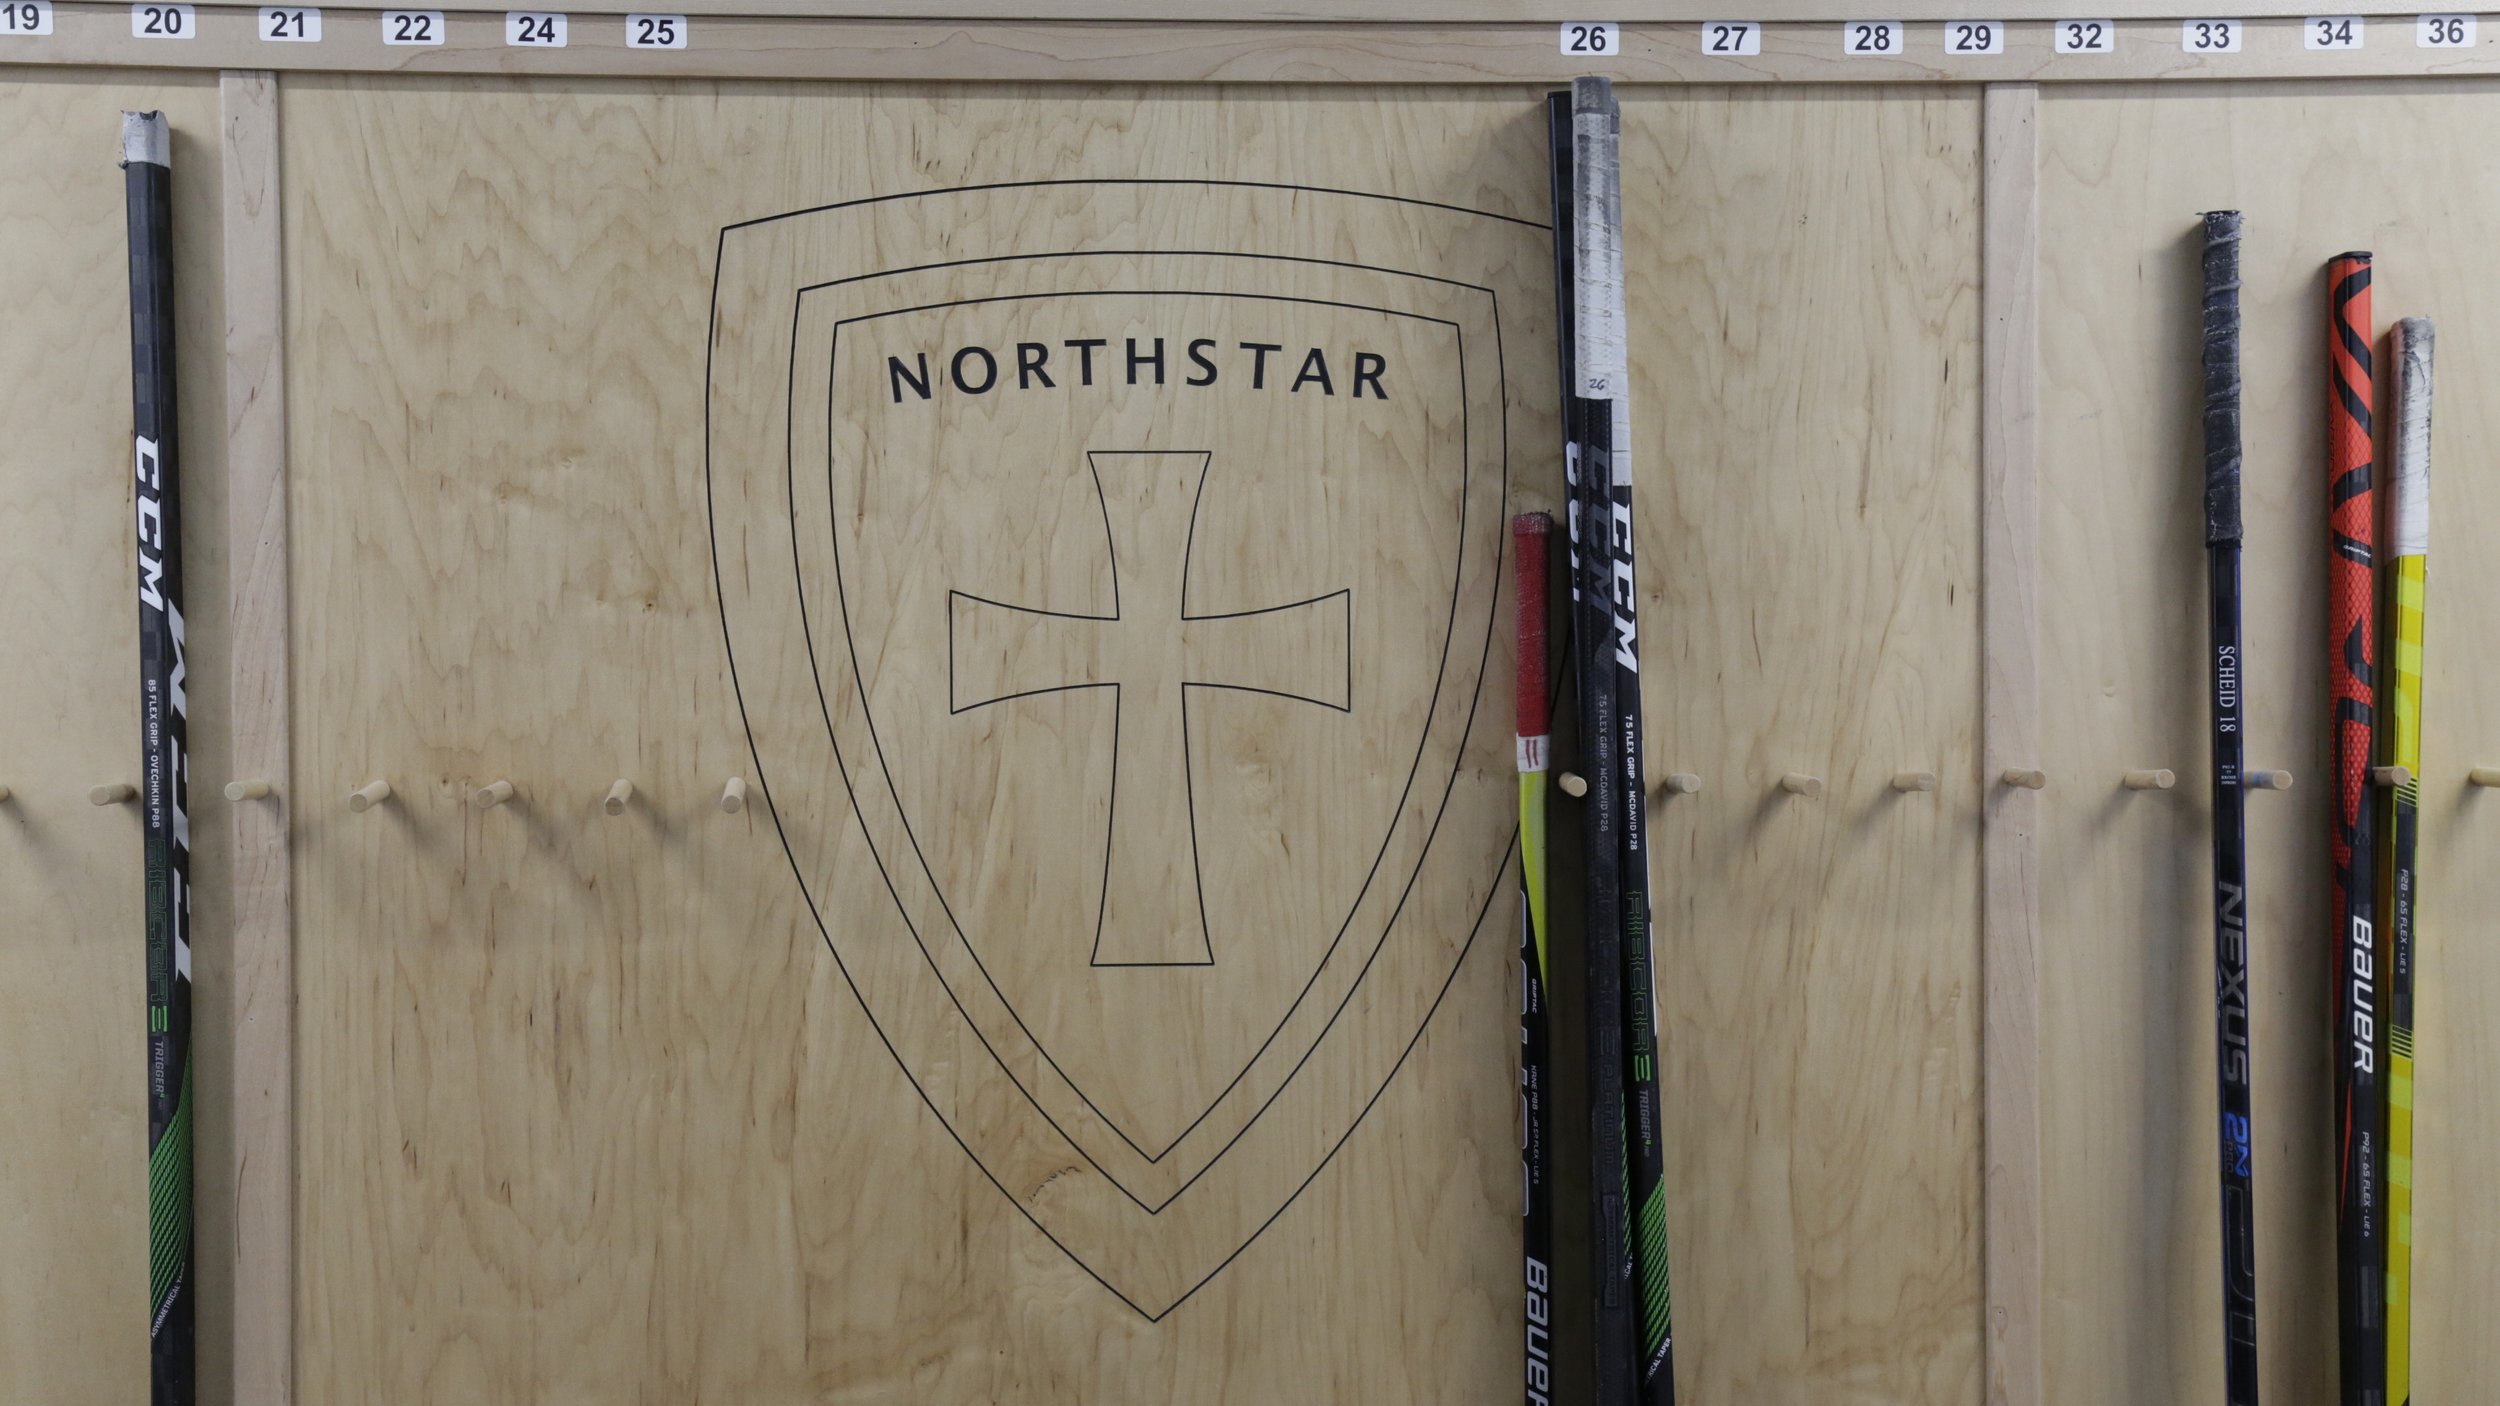 Closer Look at Engraved Logo on Hockey Stick Holding Area